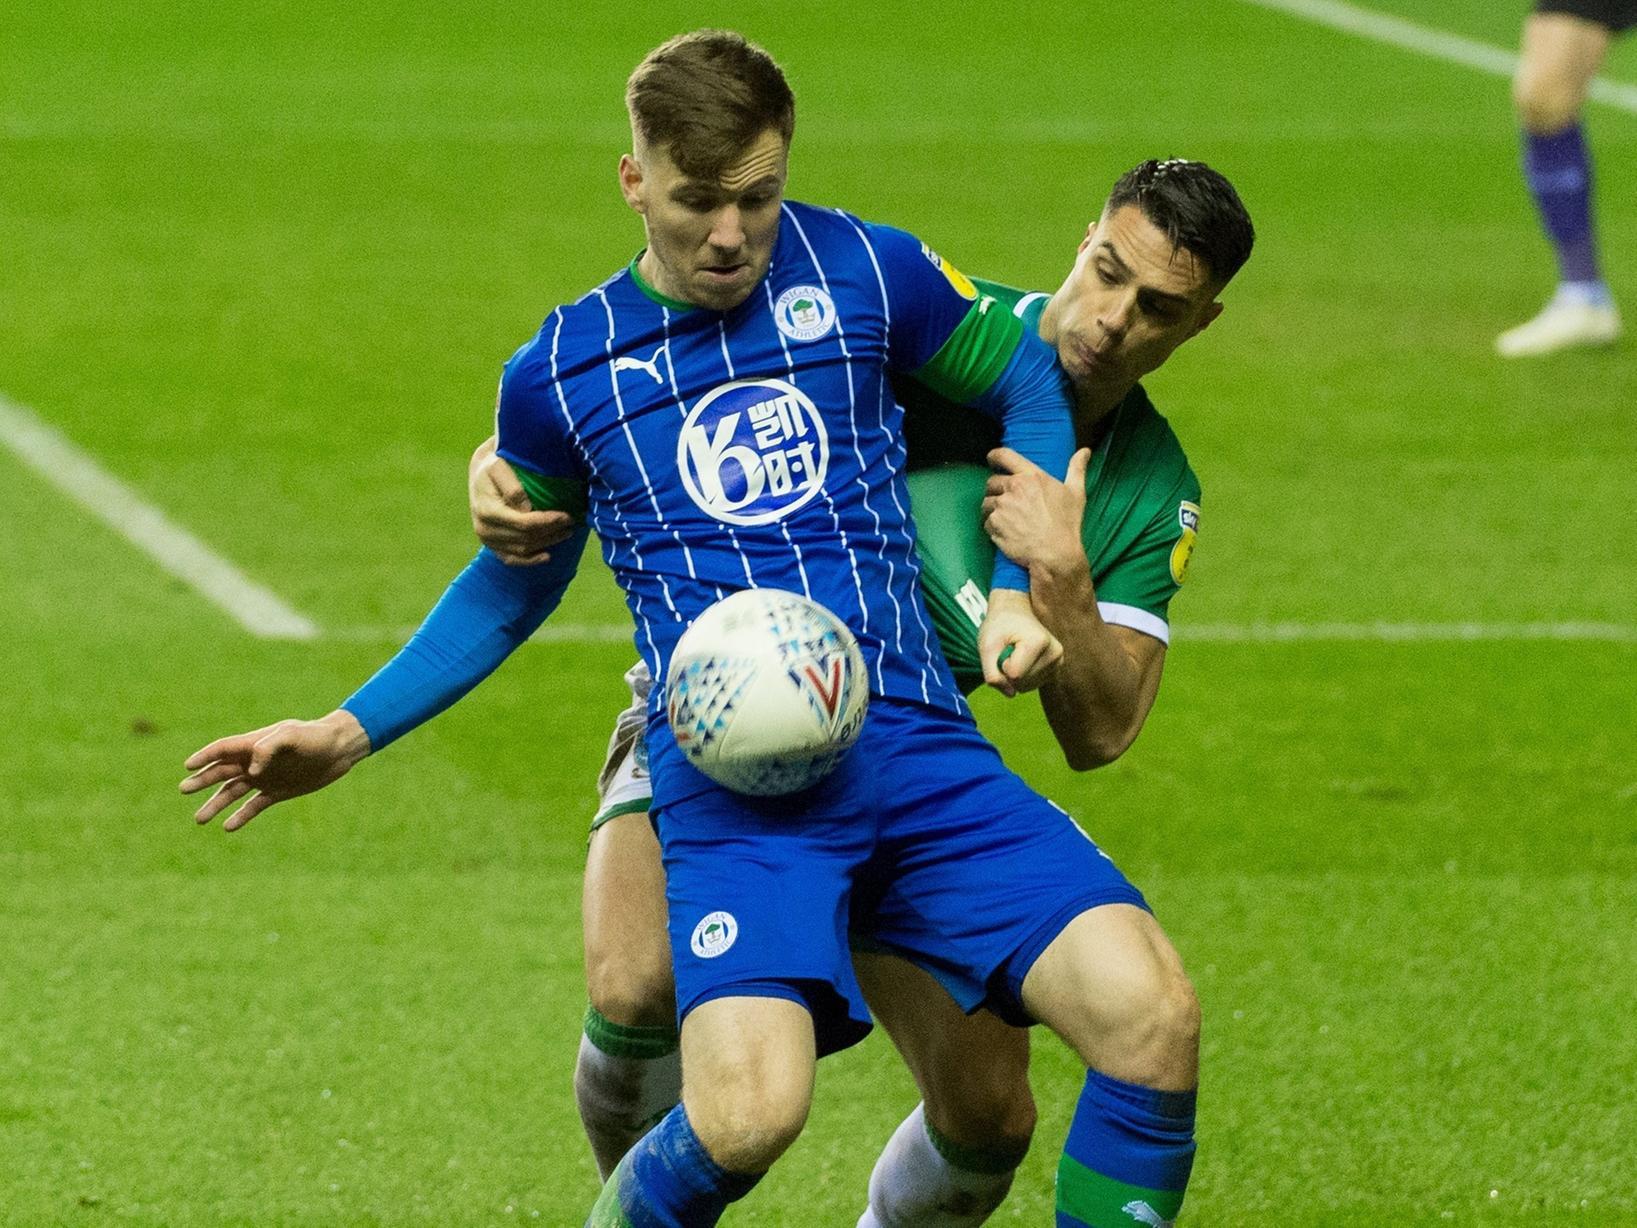 SUB - Lee Evans (for Roberts, 80): 7 - Helped Latics see it out with disciplined display